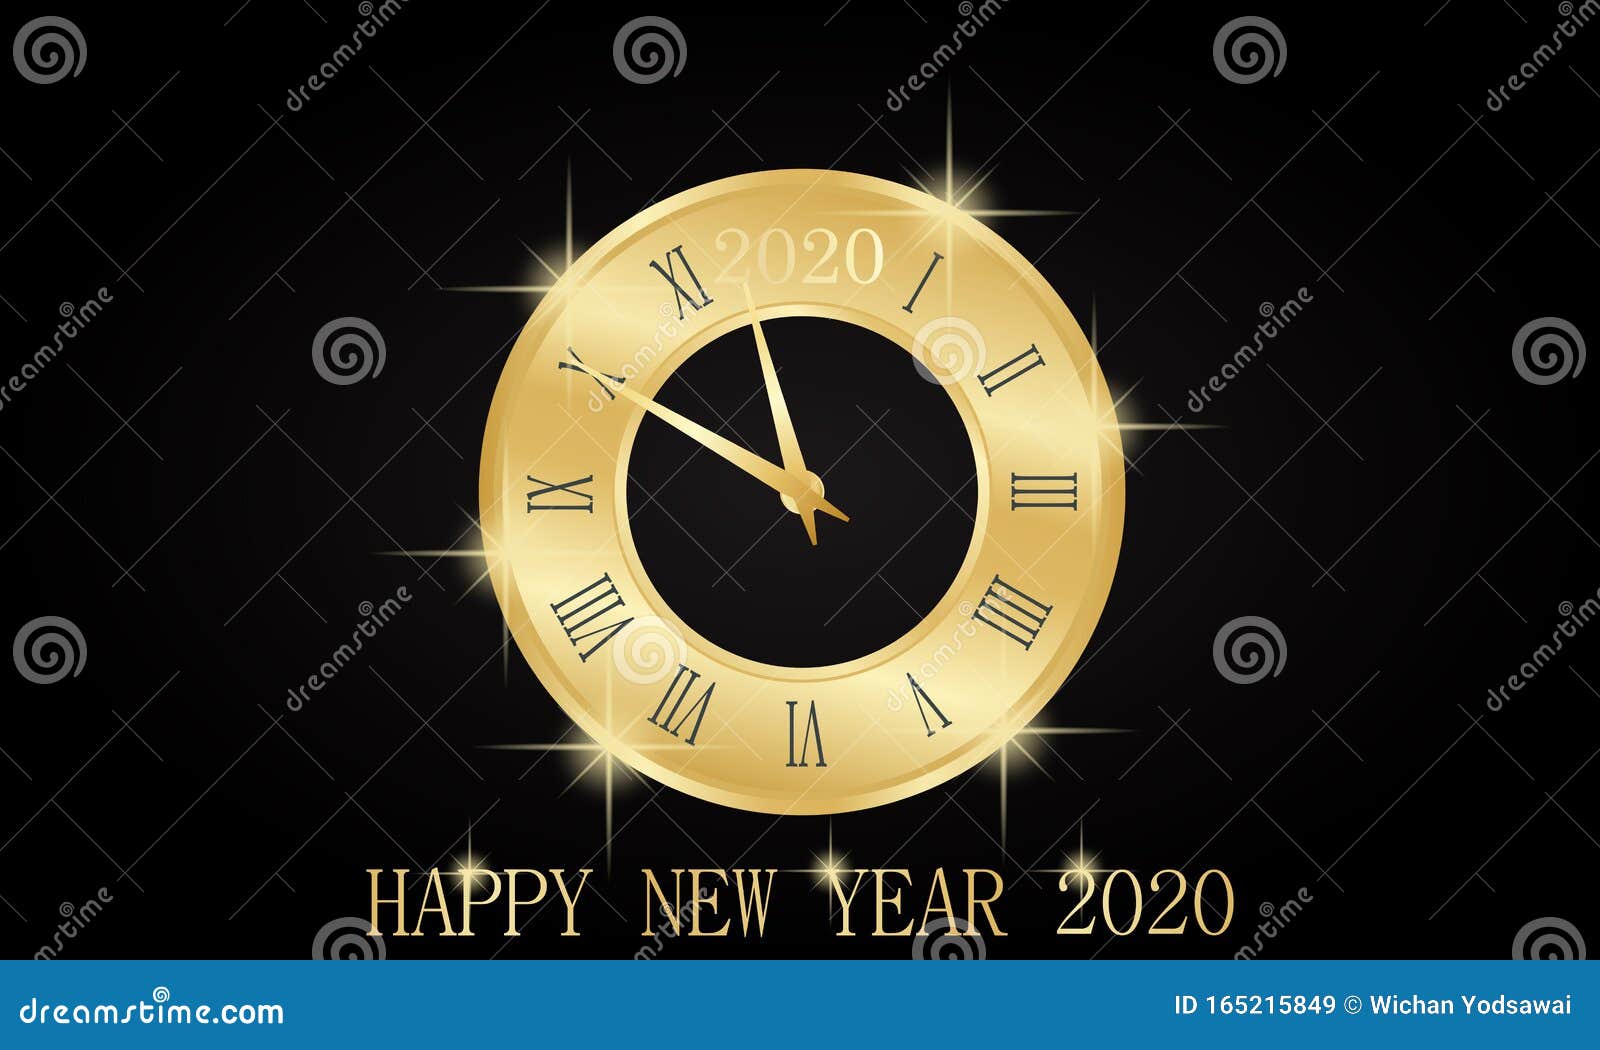 HAPPY NEW YEAR 2020 CLOCK Golden with Roman Dial Countdown To 2020 ...